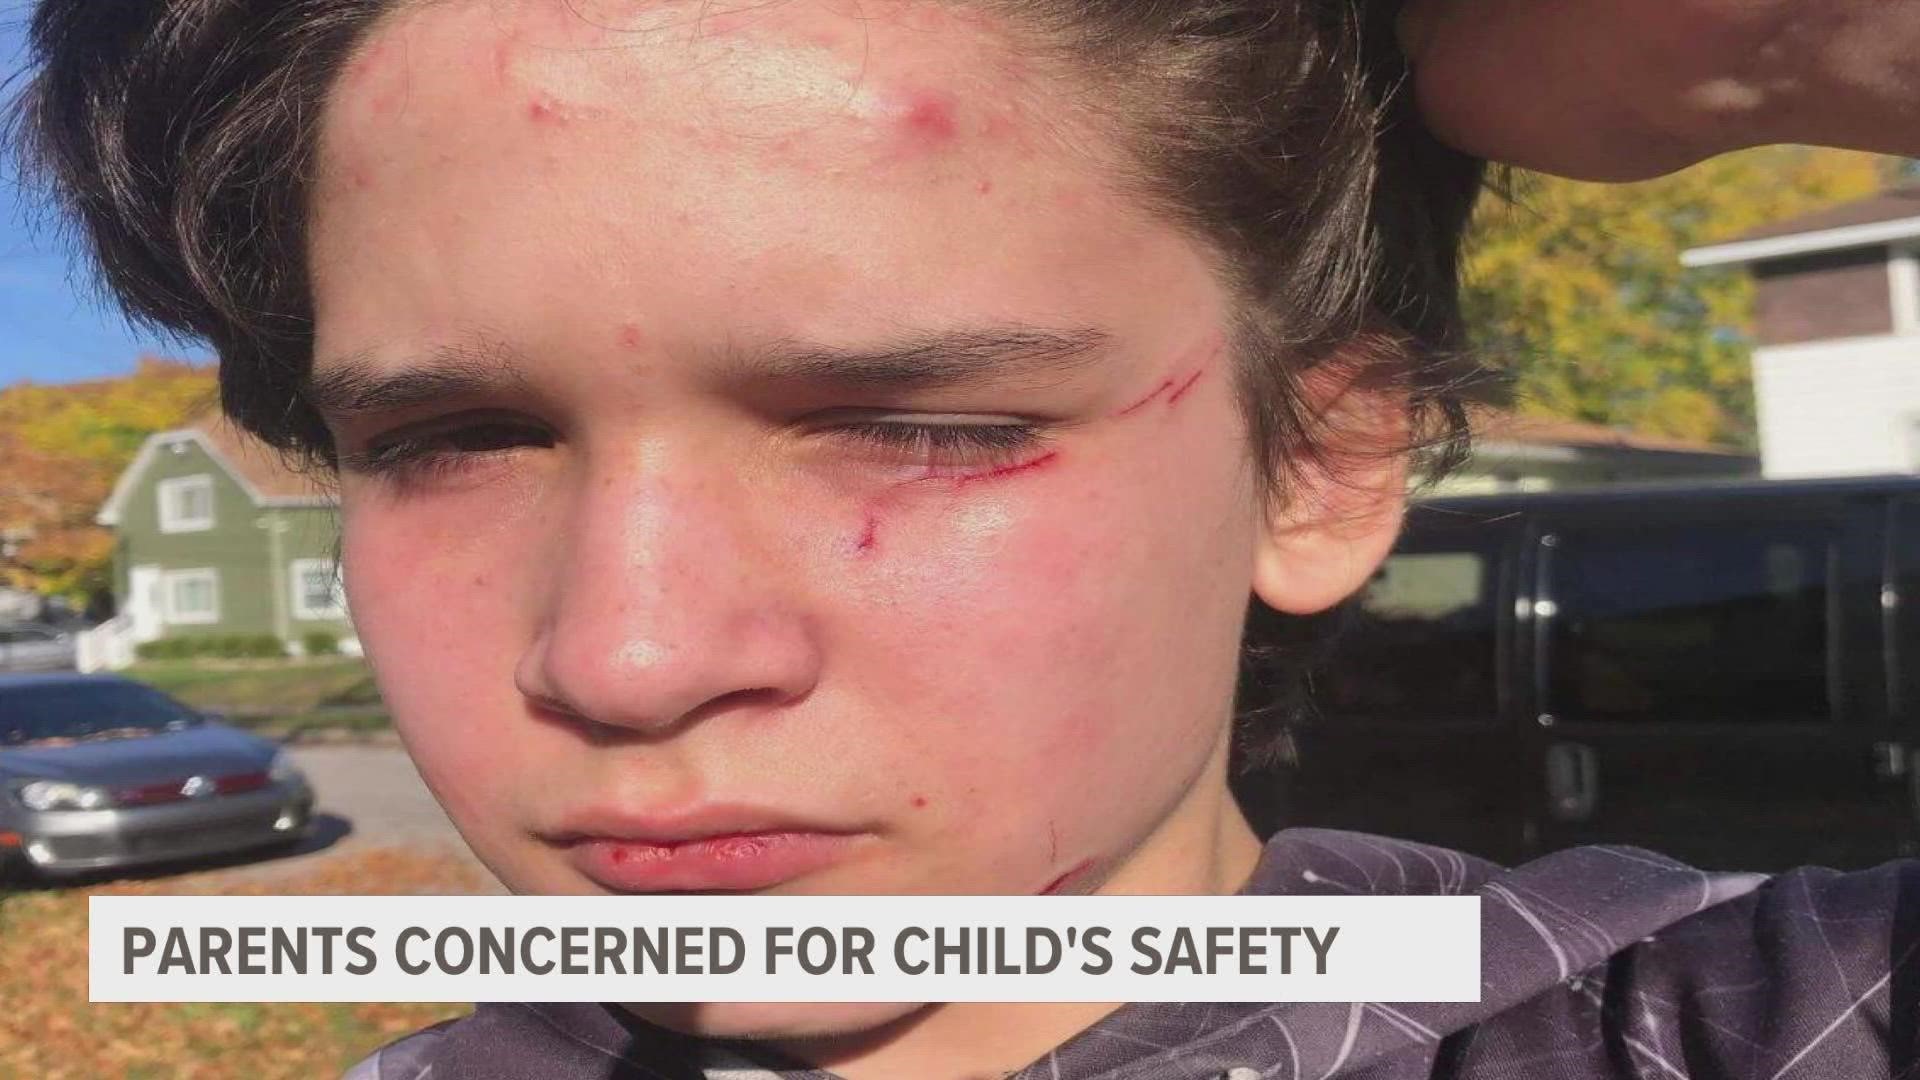 The parents say their son was cut in the face with a pair of scissors by two bullies after an altercation that started on the bus.